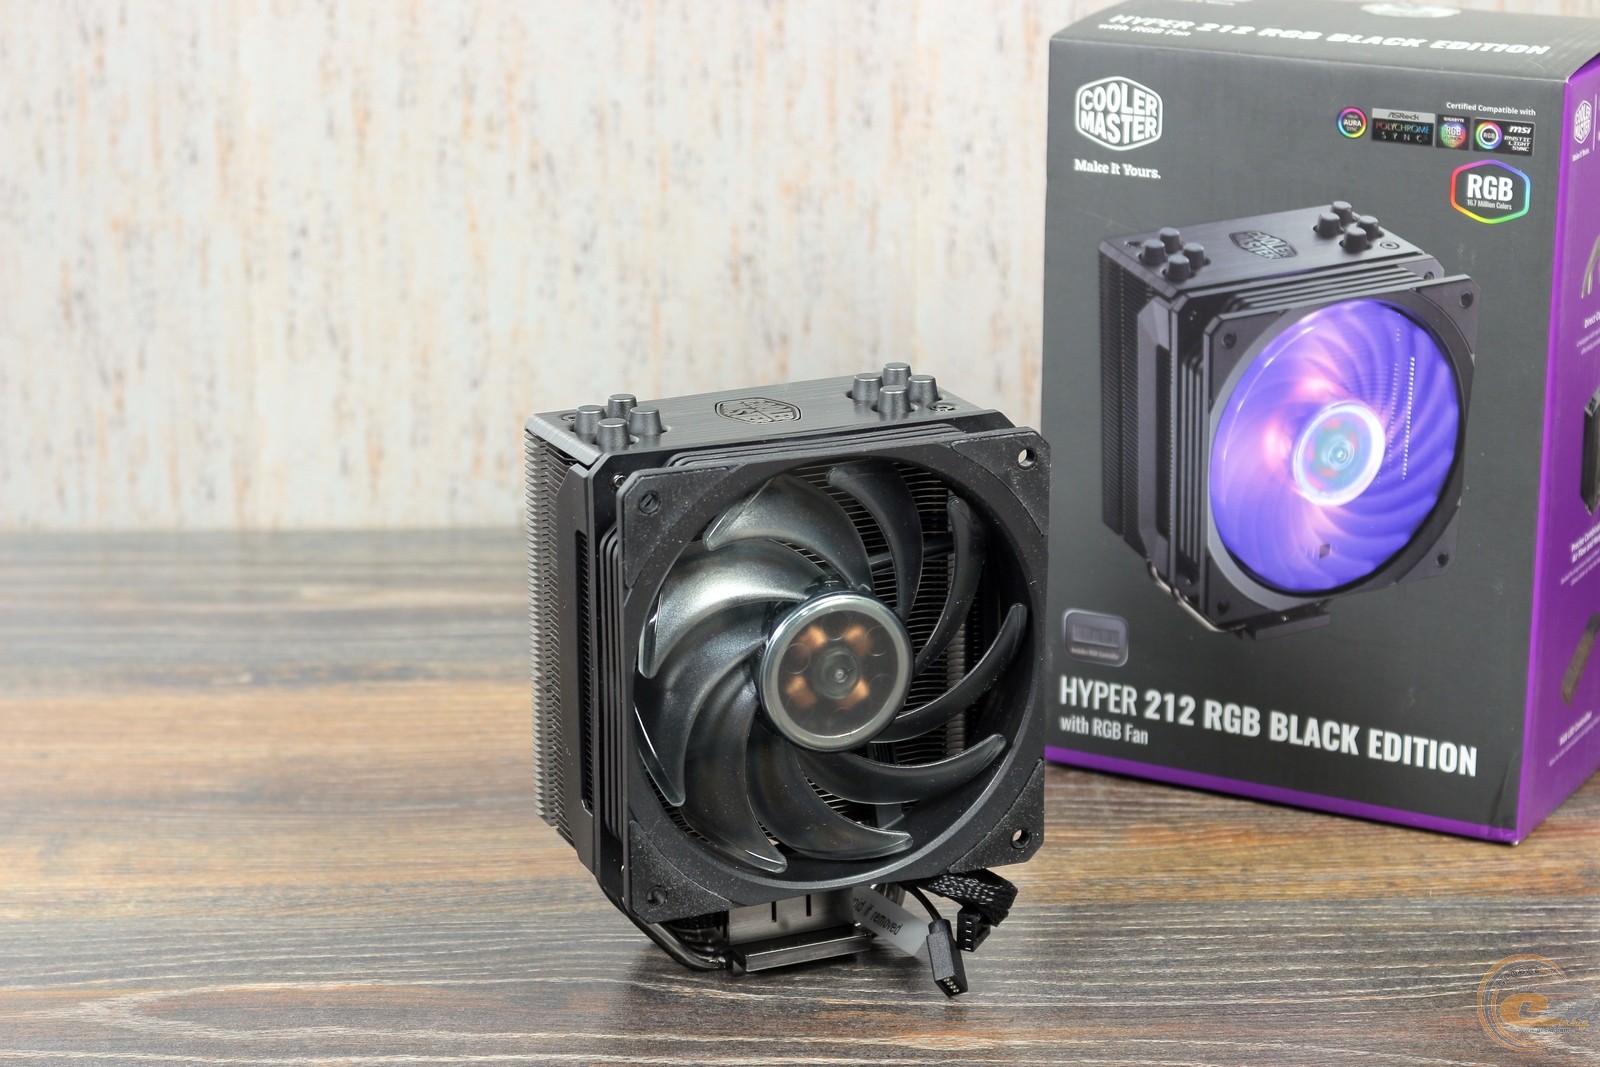 Cooler Master Hyper 212 RGB Black Edition Air Cooler Review - PC Perspective